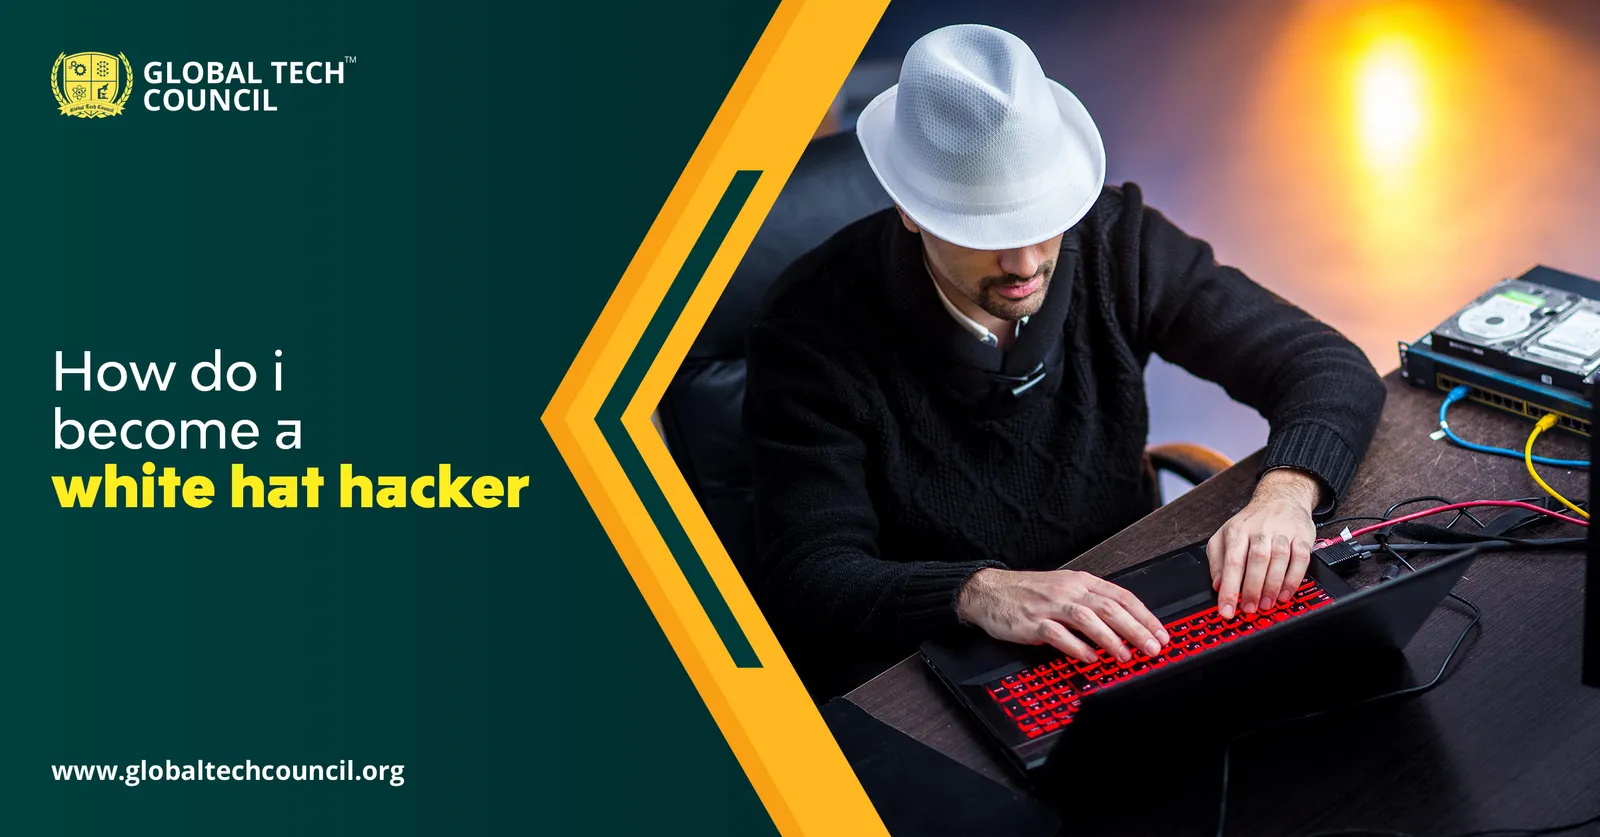 How do I become a white hat hacker?